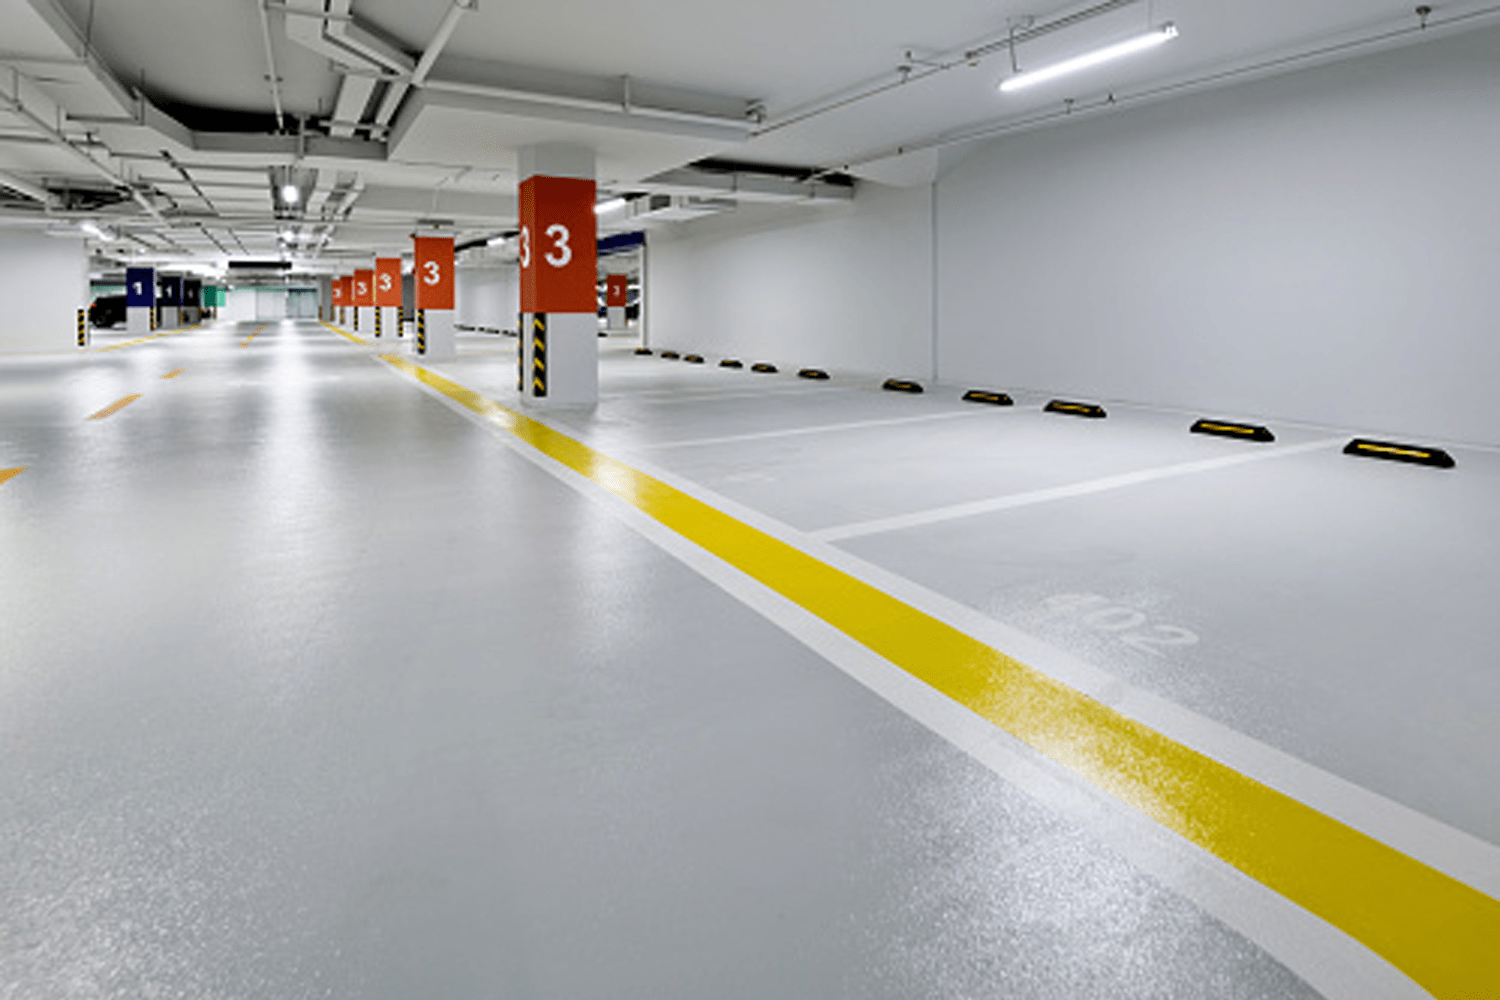 traffic and parking deck floor coatings with quartz broadcast and striping and numbering of parking spaces